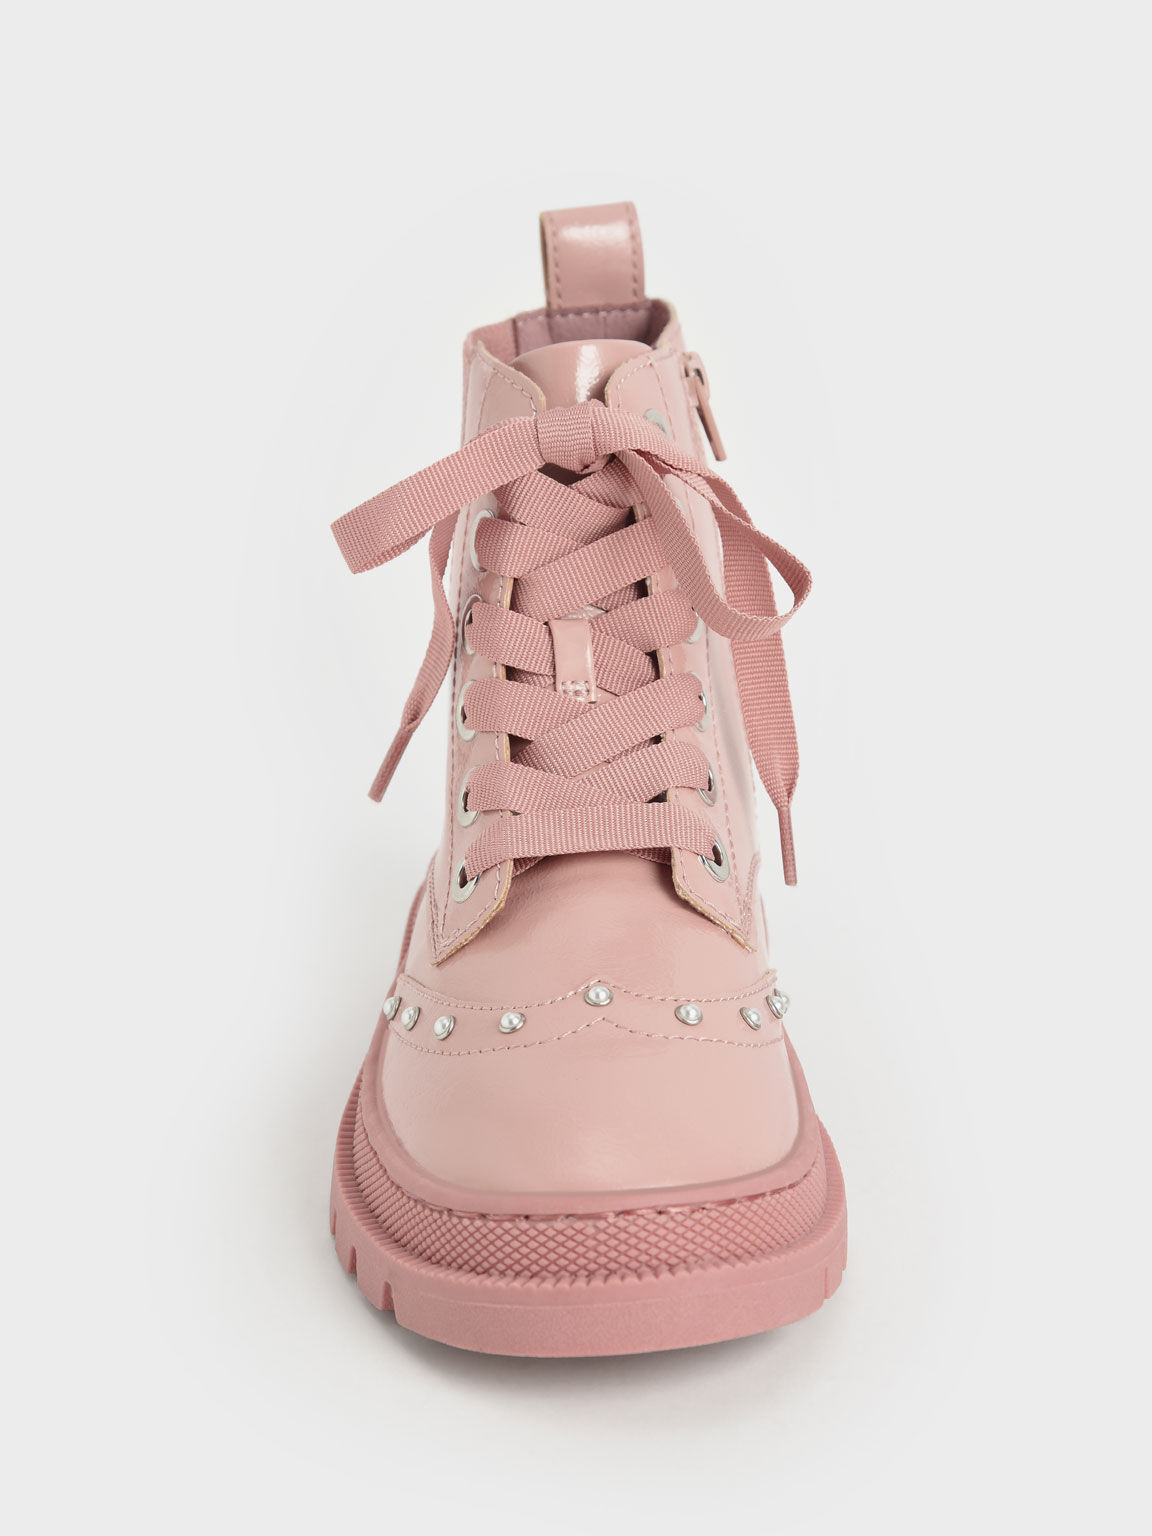 Girls' Patent Studded Lace-Up Ankle Boots, Pink, hi-res